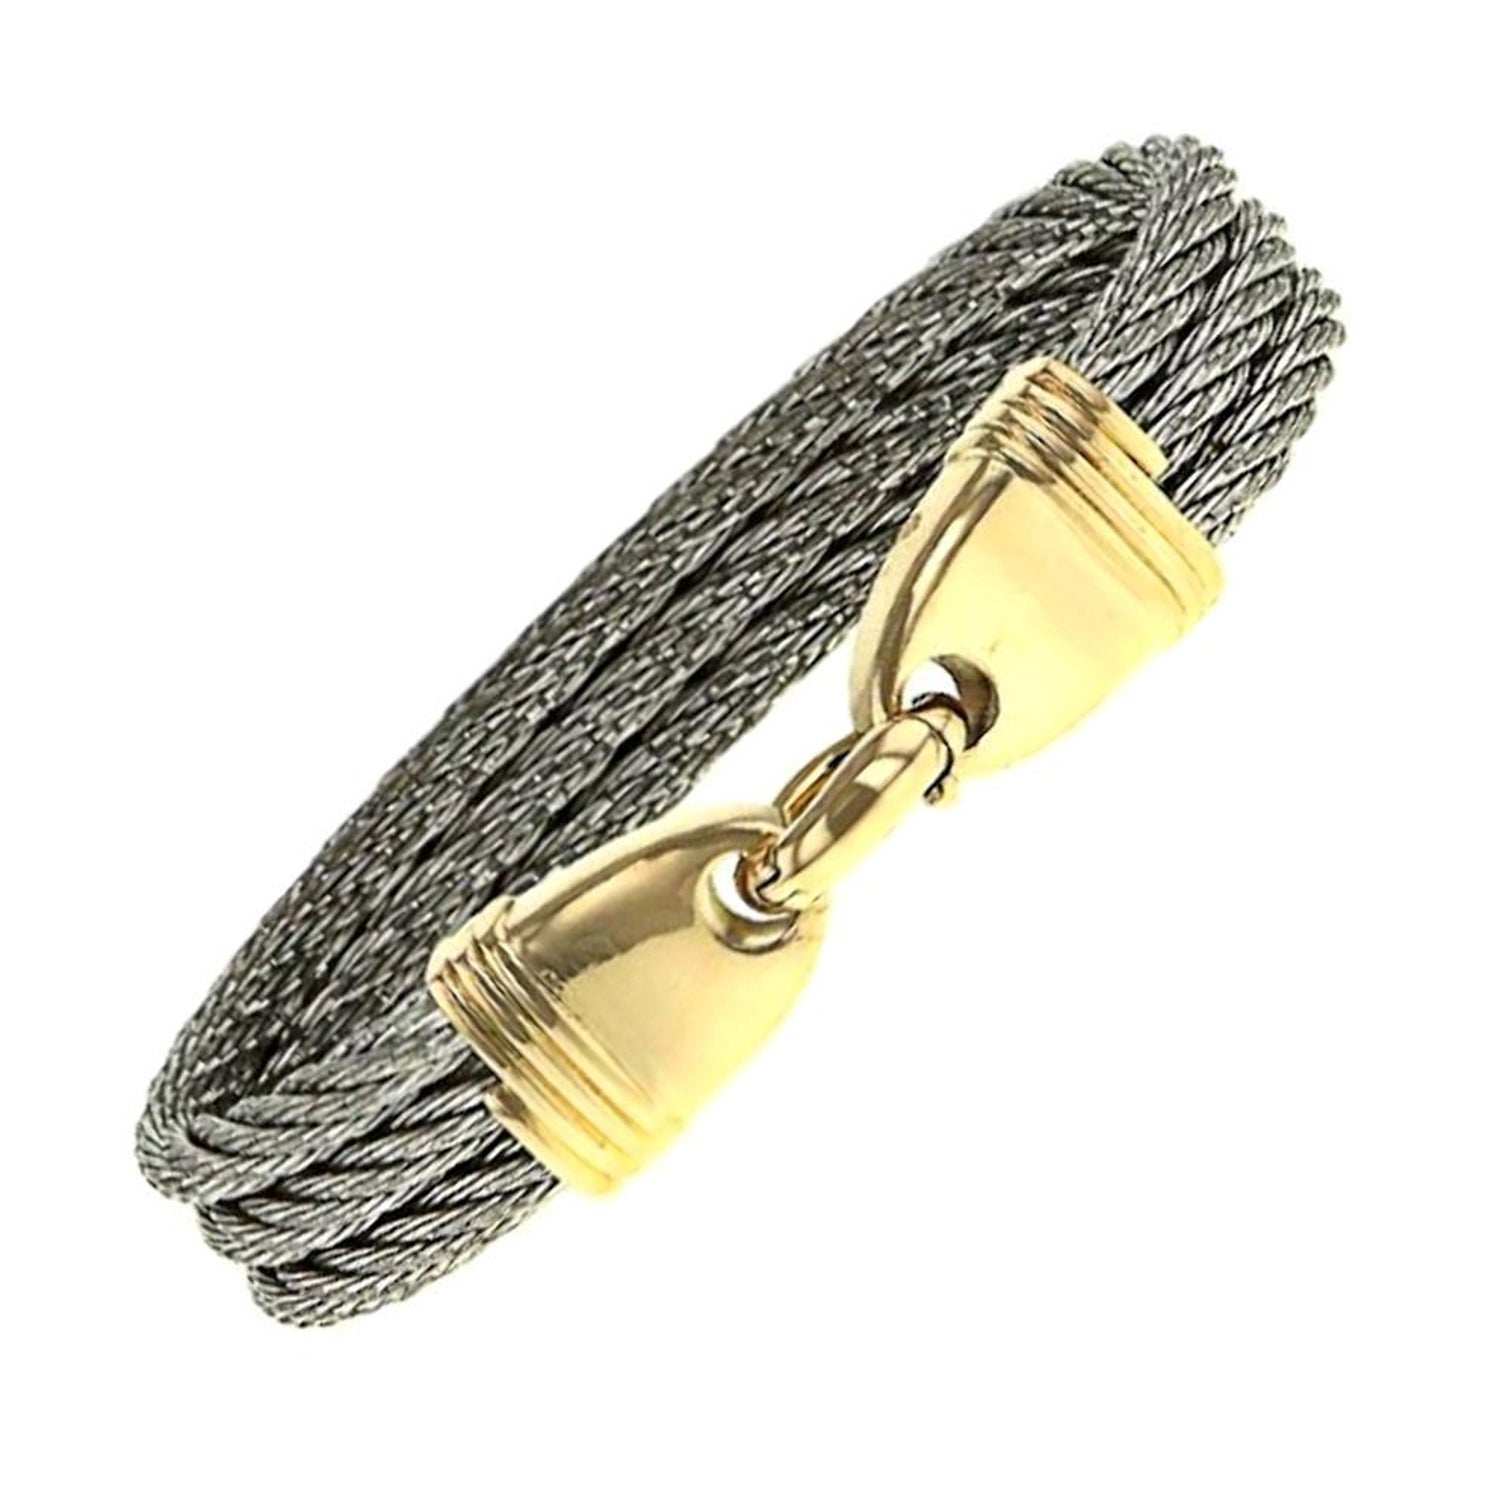 Buy Fred Force 10 LM Buckle Half Diamond Au750 Double Cable Bracelet Gold  LM Gold from Japan - Buy authentic Plus exclusive items from Japan